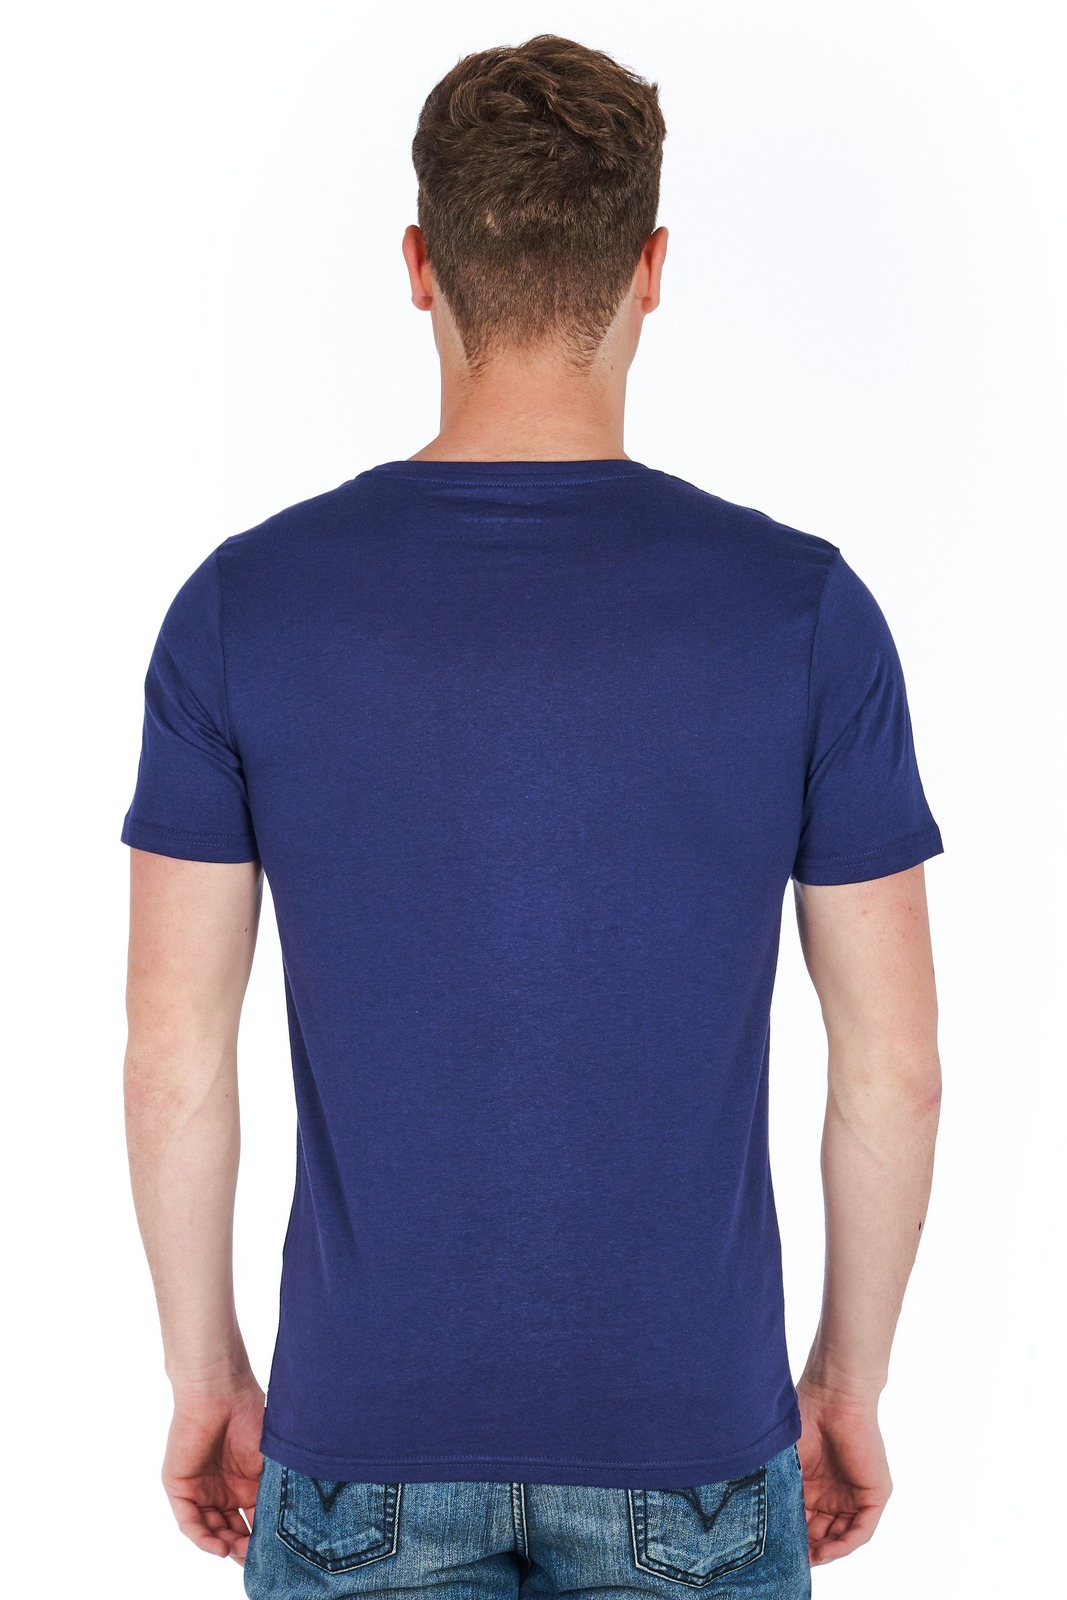 Jeckerson Blue T-shirts for Men - ORDINARY